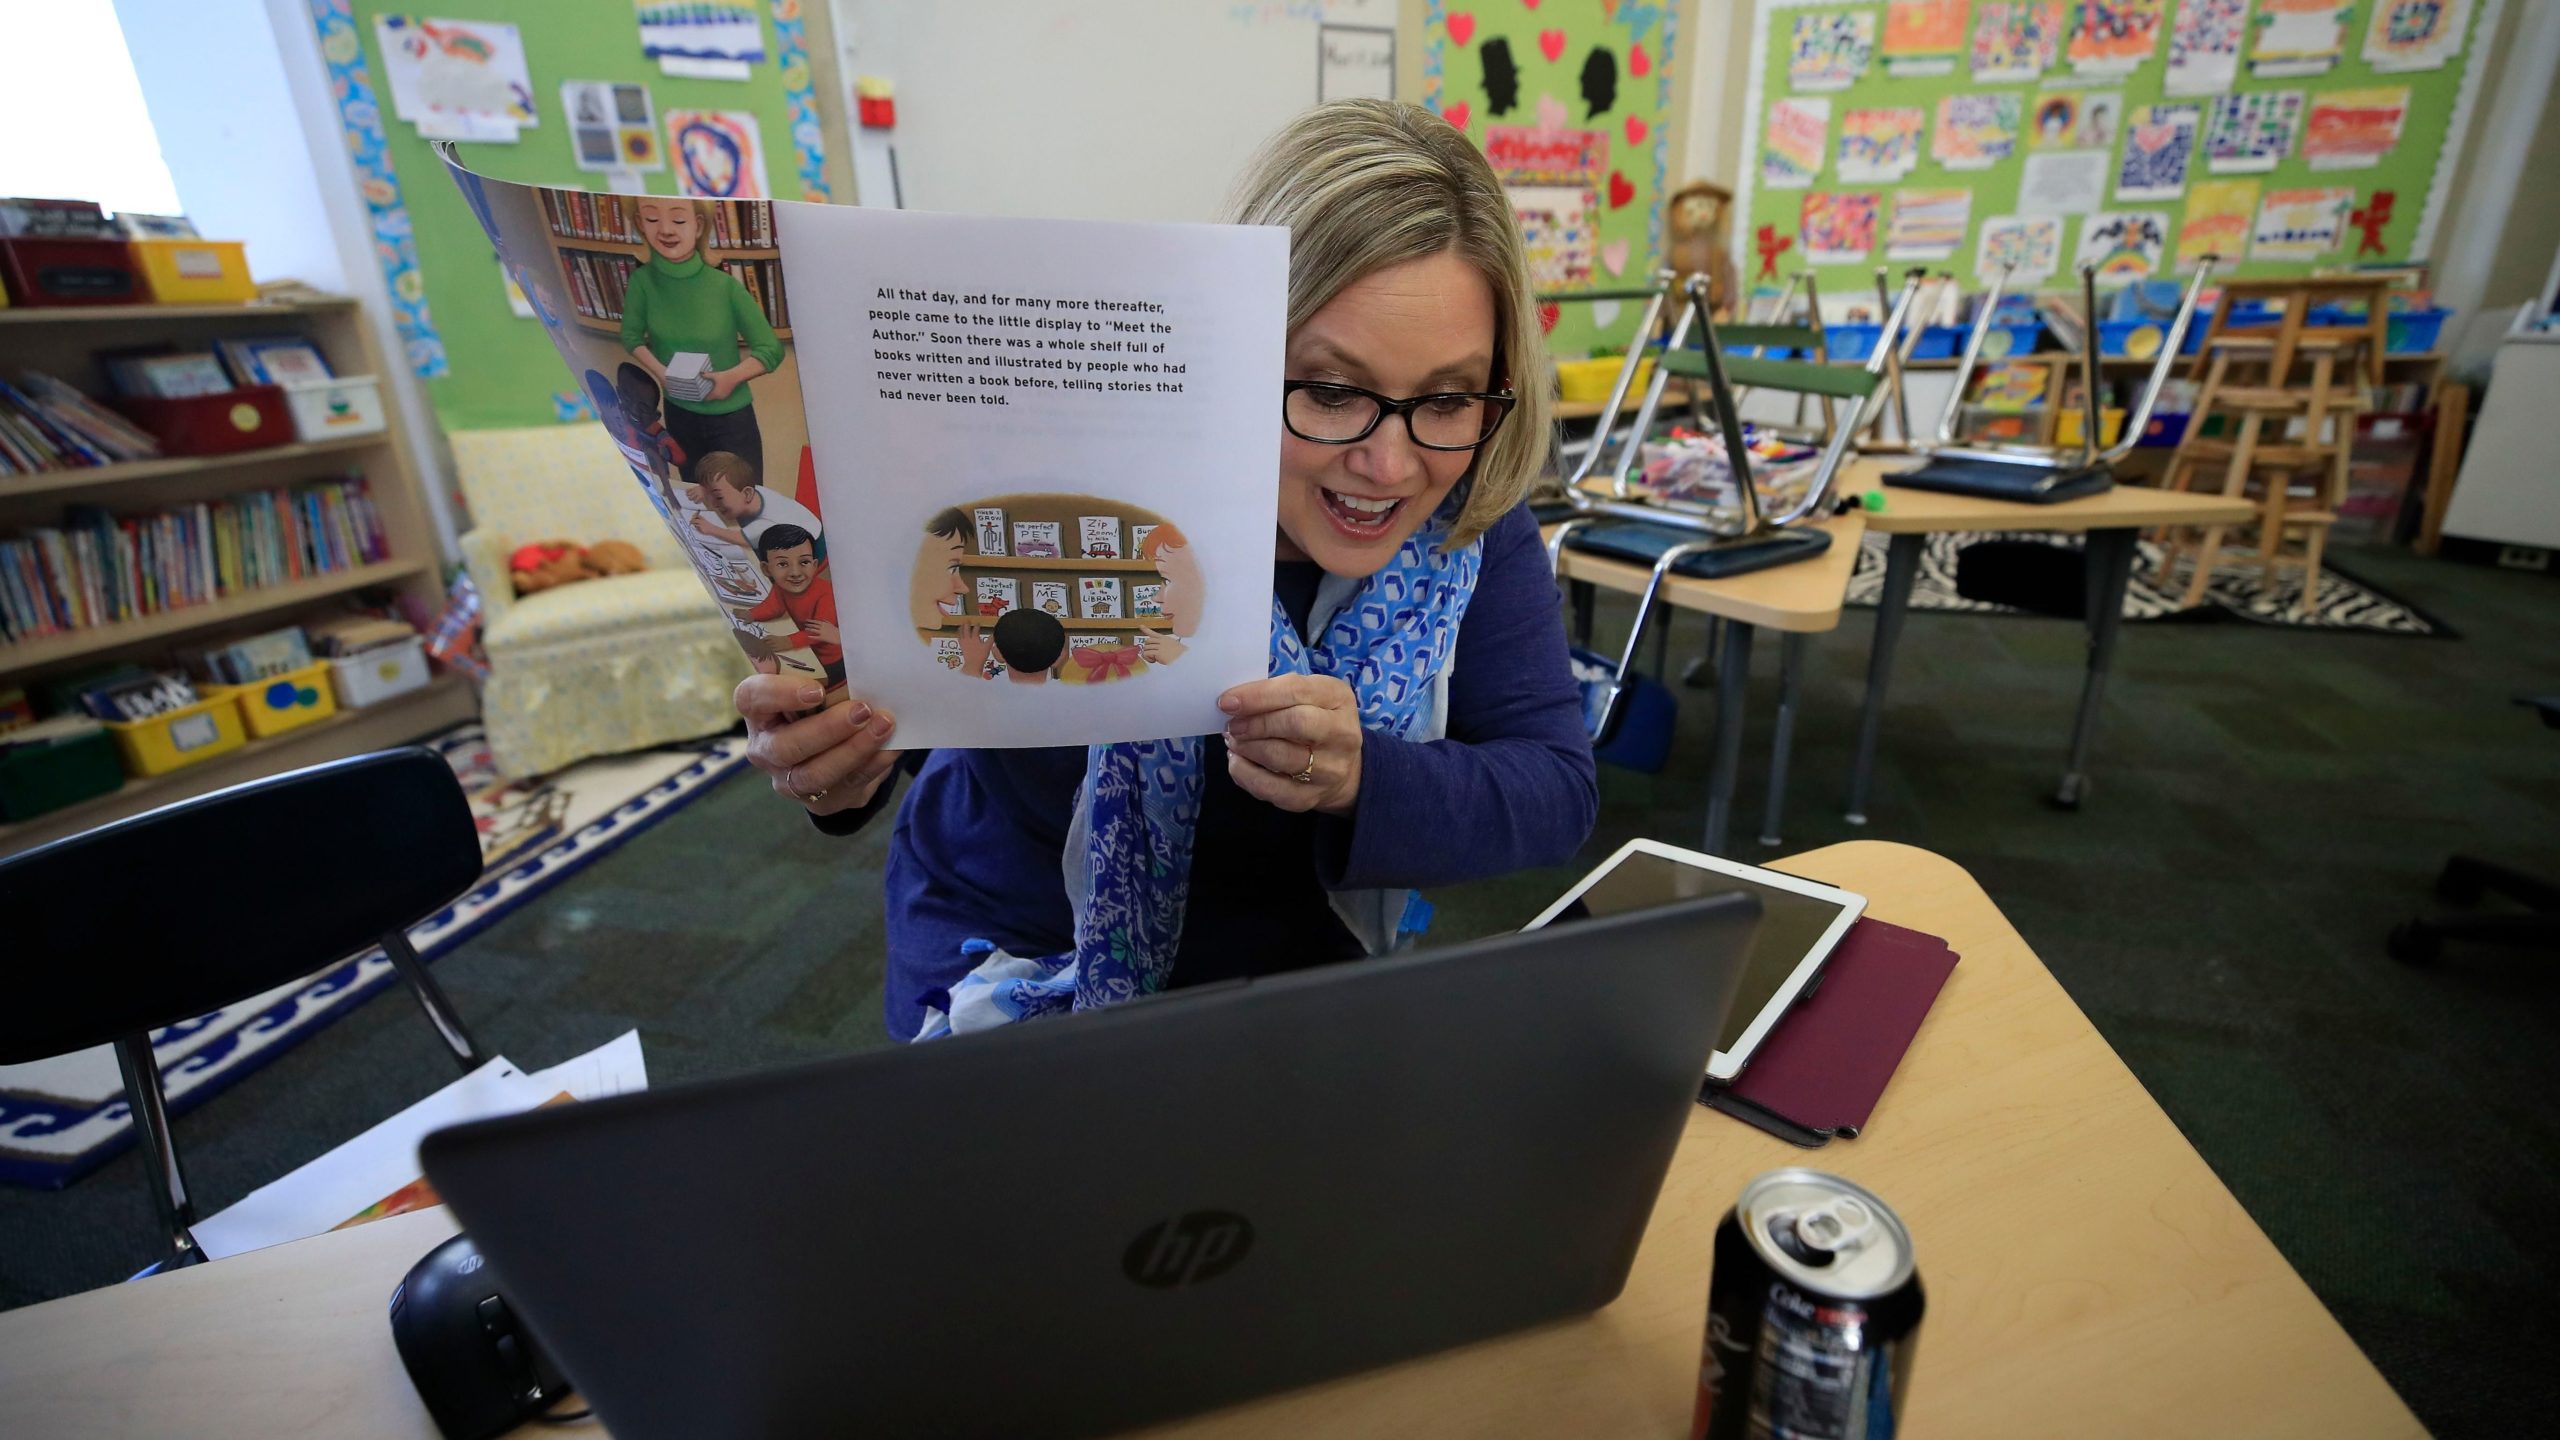 Joanne Collins Brock , a second grade teacher at St Francis School (Goshen), teaches online in her empty classroom on April 15, 2020, in Goshen, Ky. (Photo: Andy Lyons, Getty Images)